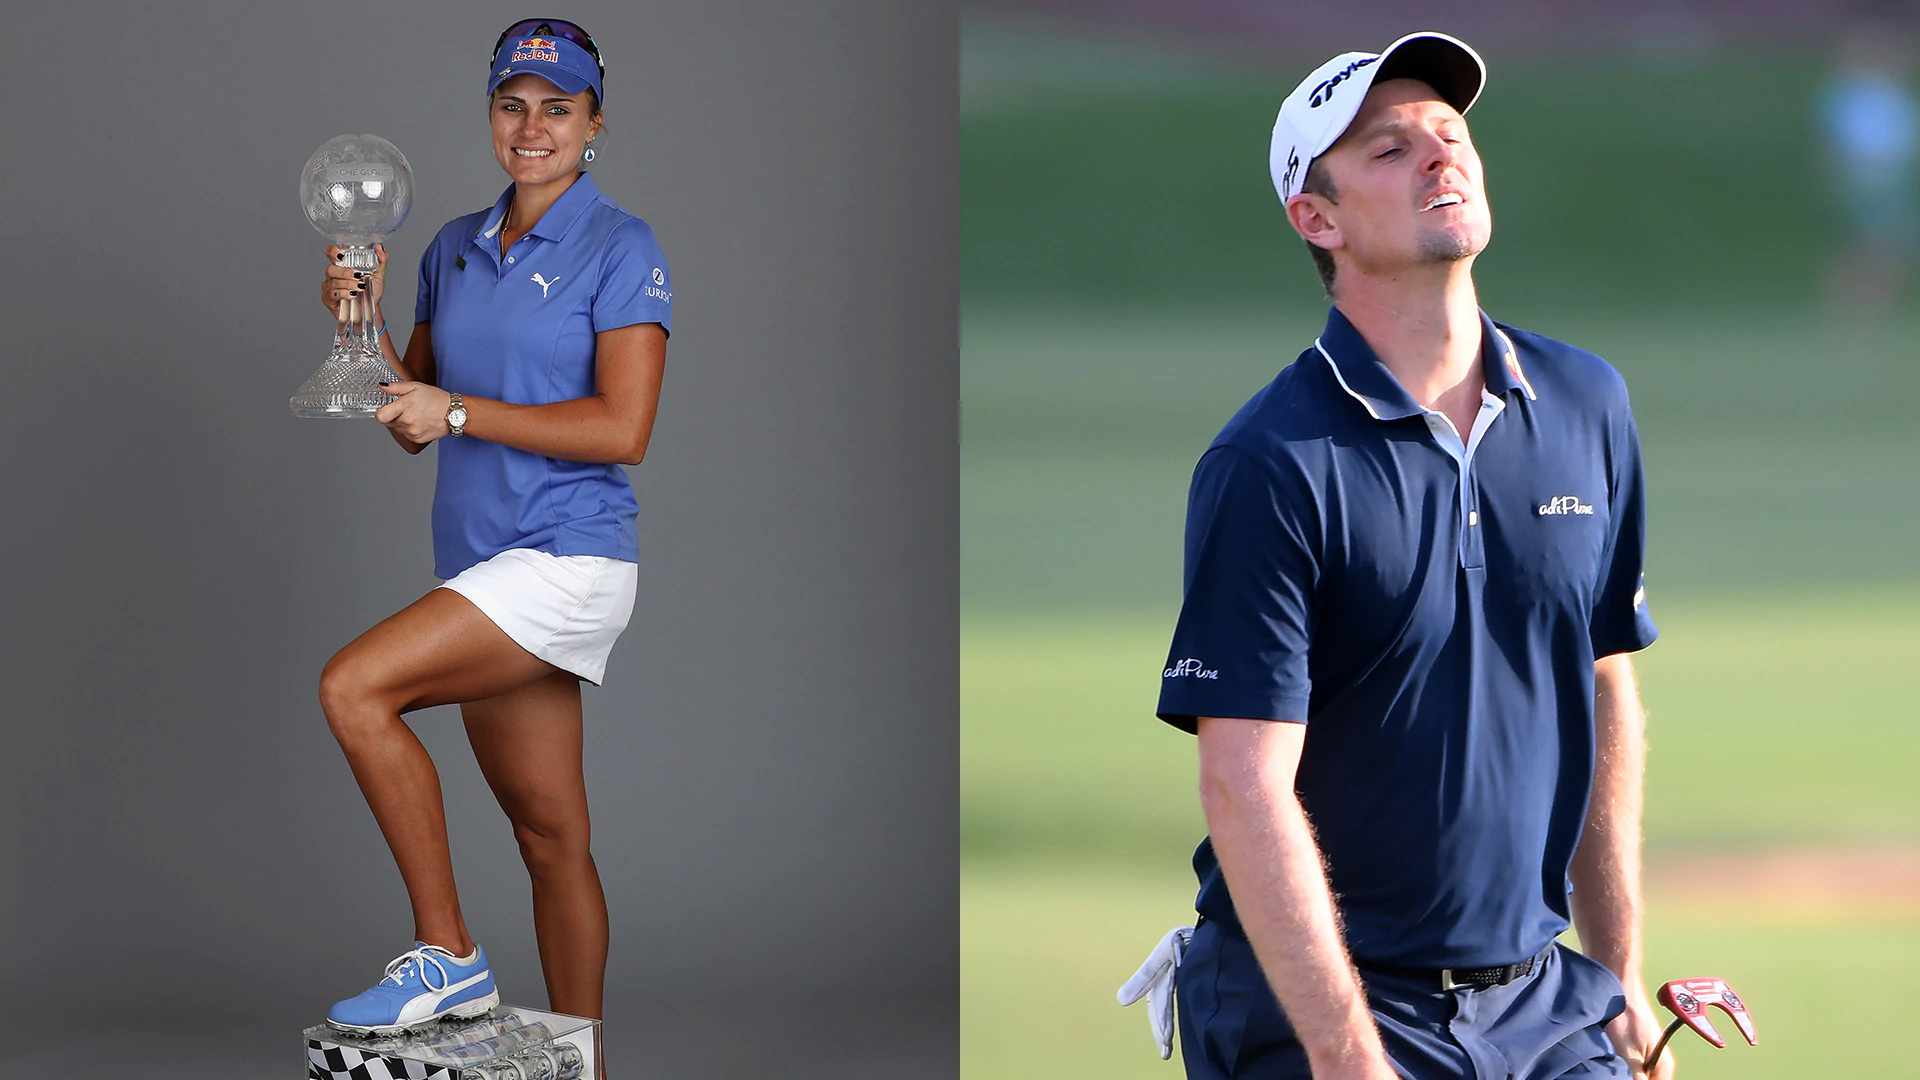 Stock Watch: Lexi, Justin rose or fall this week?